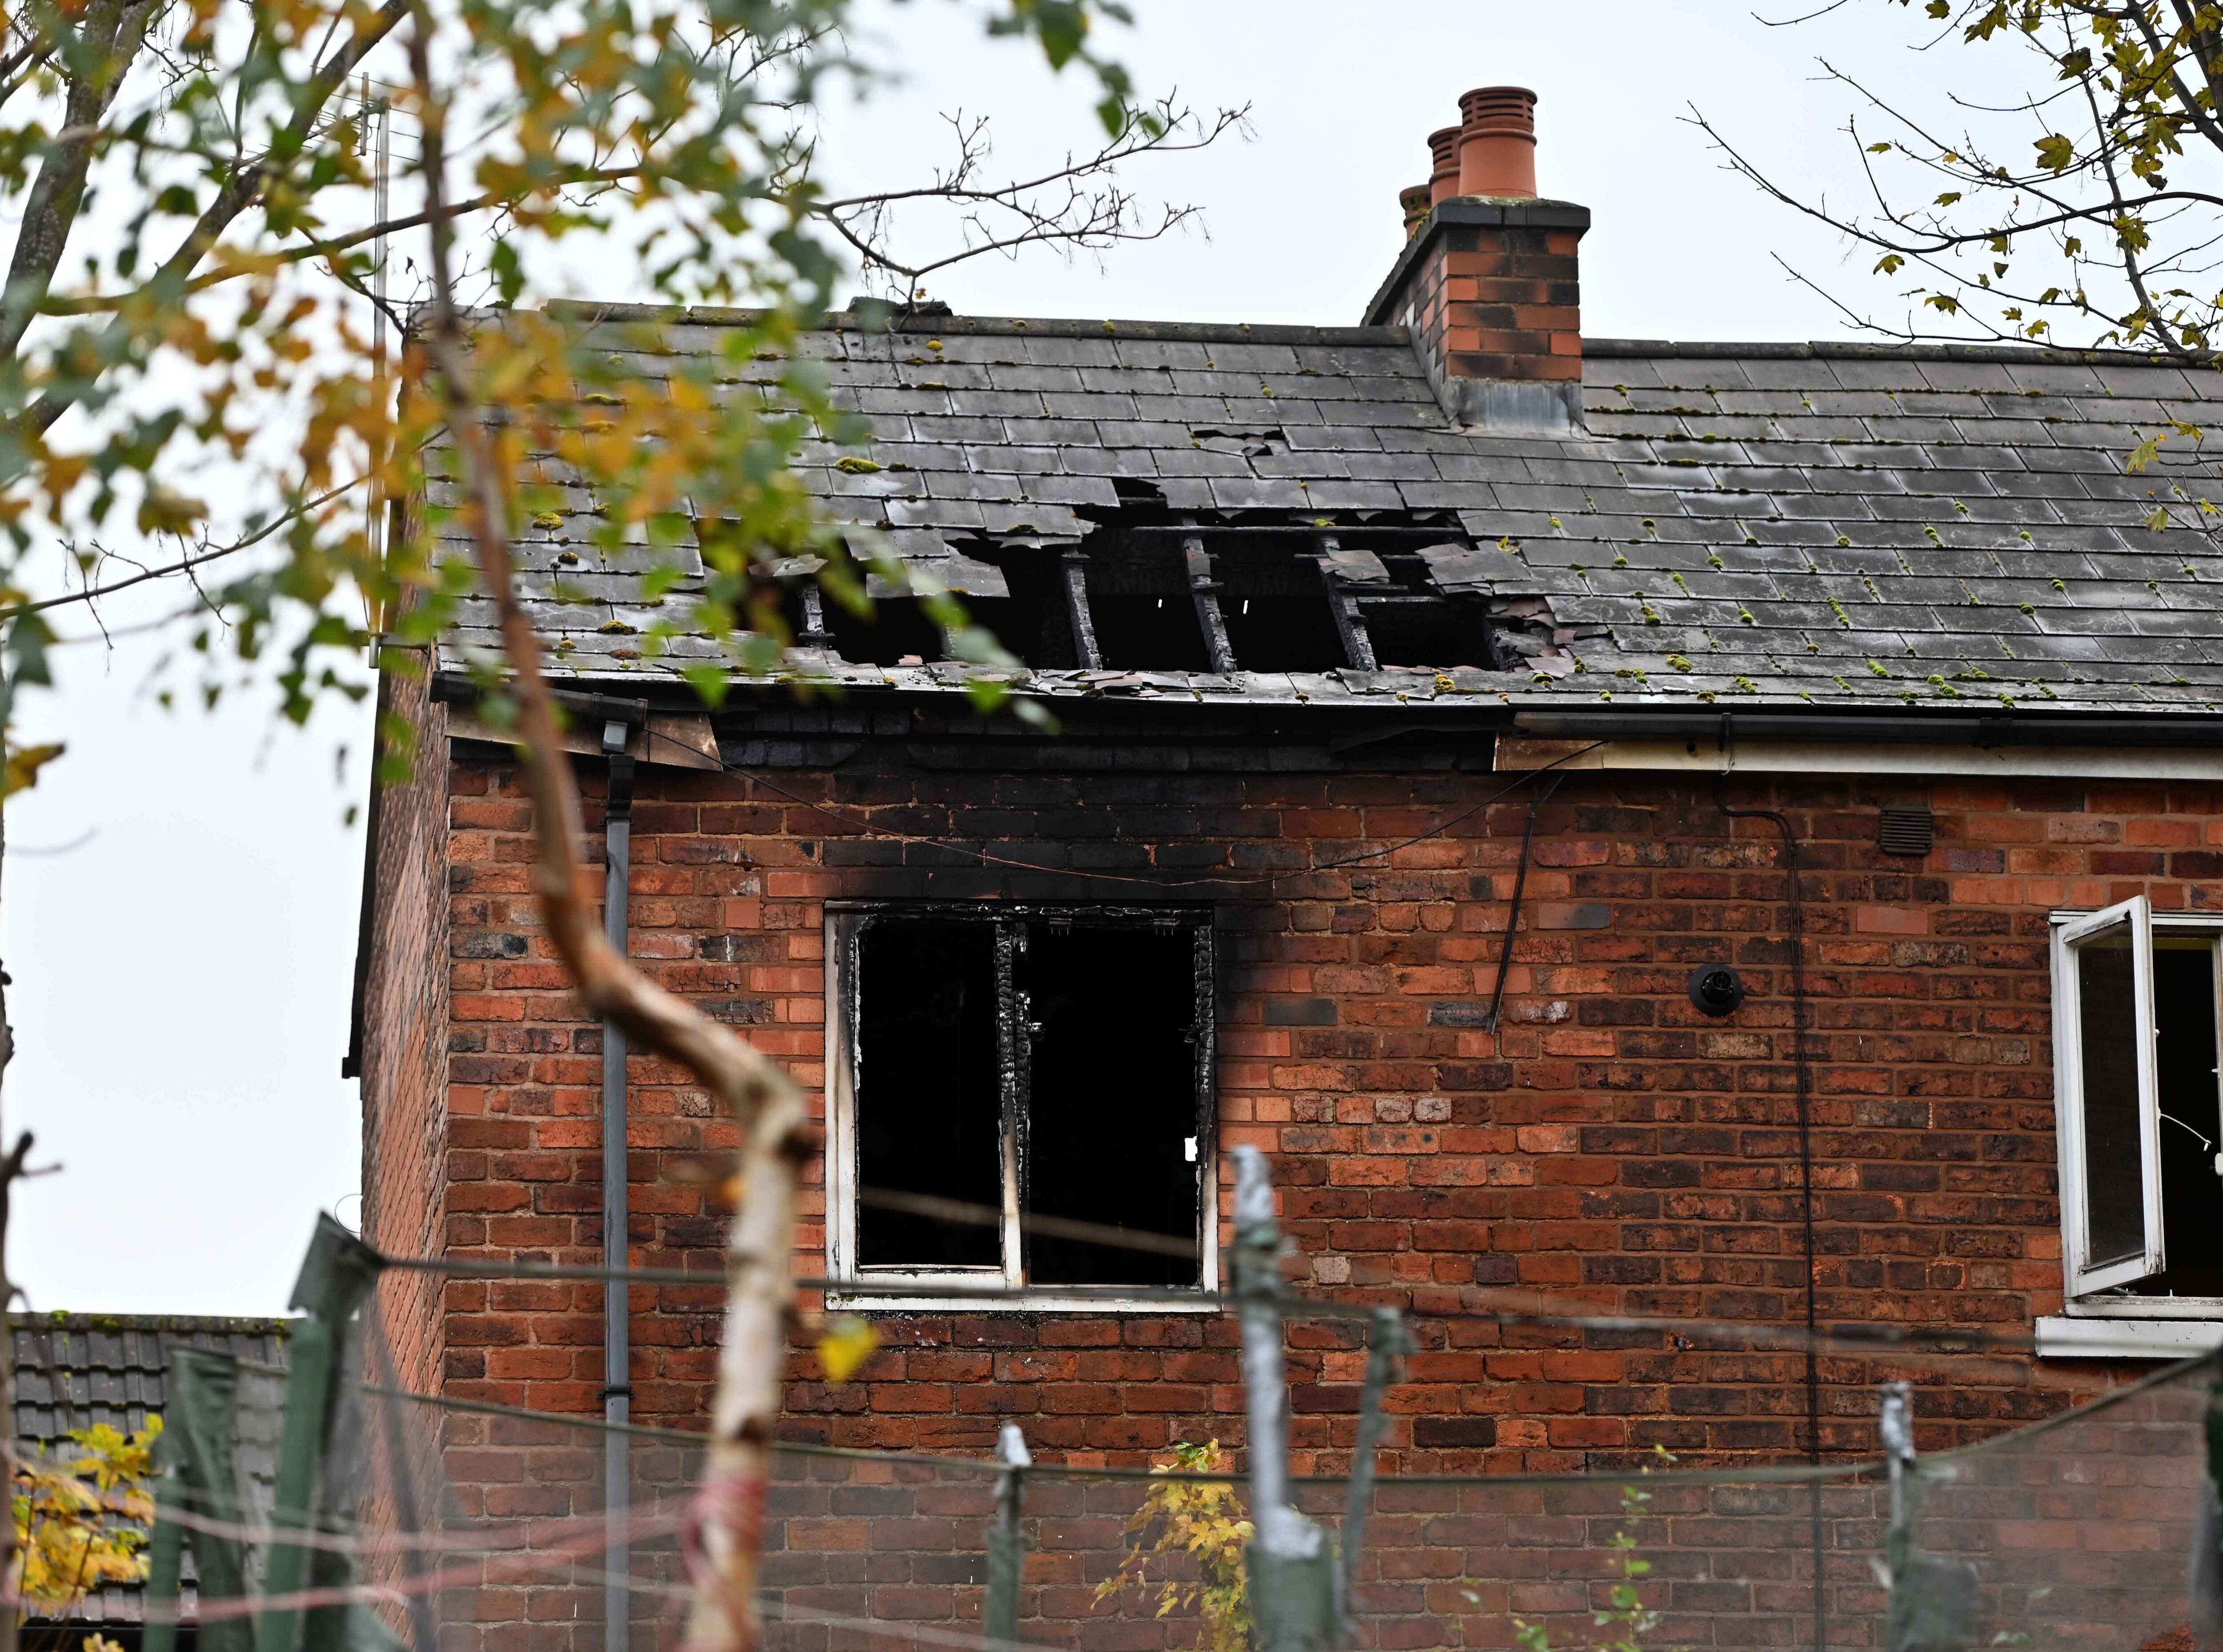 Police issue update on cause of Walsall flat blaze where man found dead 